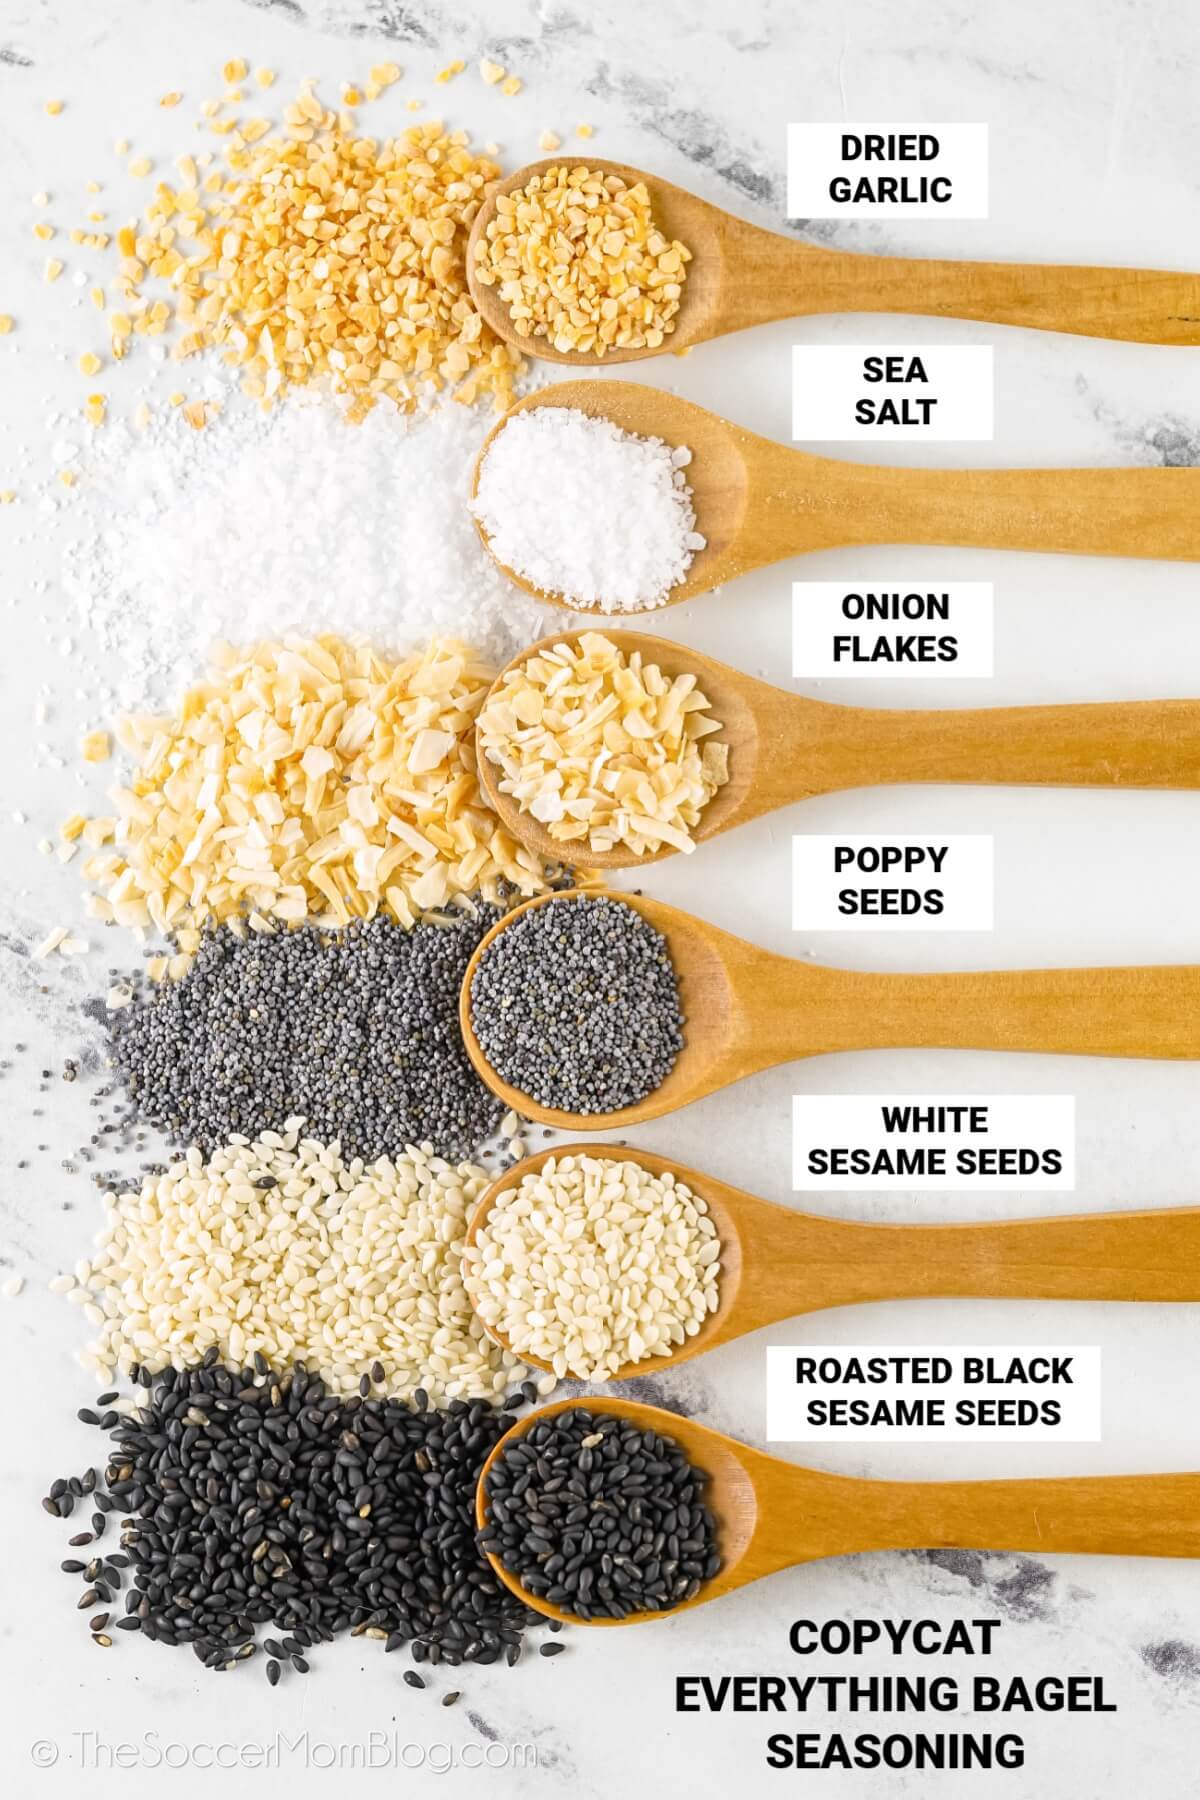 ingredients to make Everything Bagel Seasoning - individual spices on spoons - with text labels